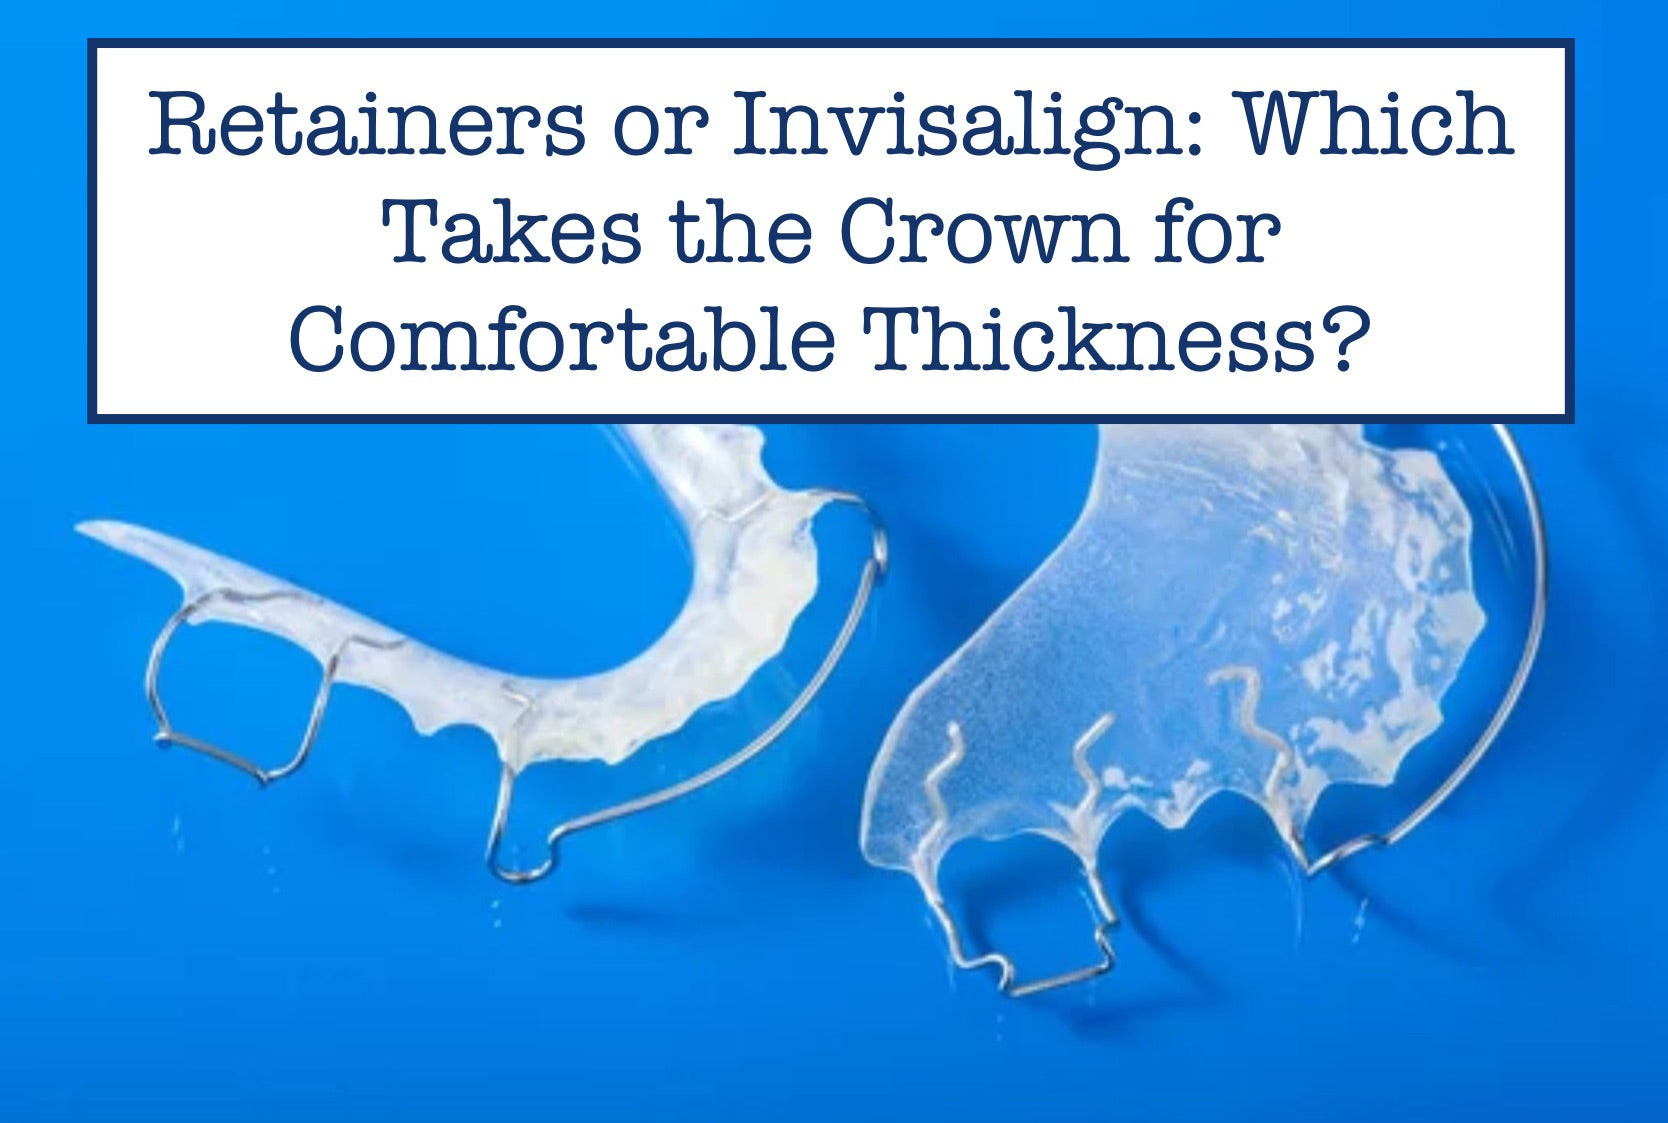 Retainers or Invisalign: Which Takes the Crown for Comfortable Thickness?